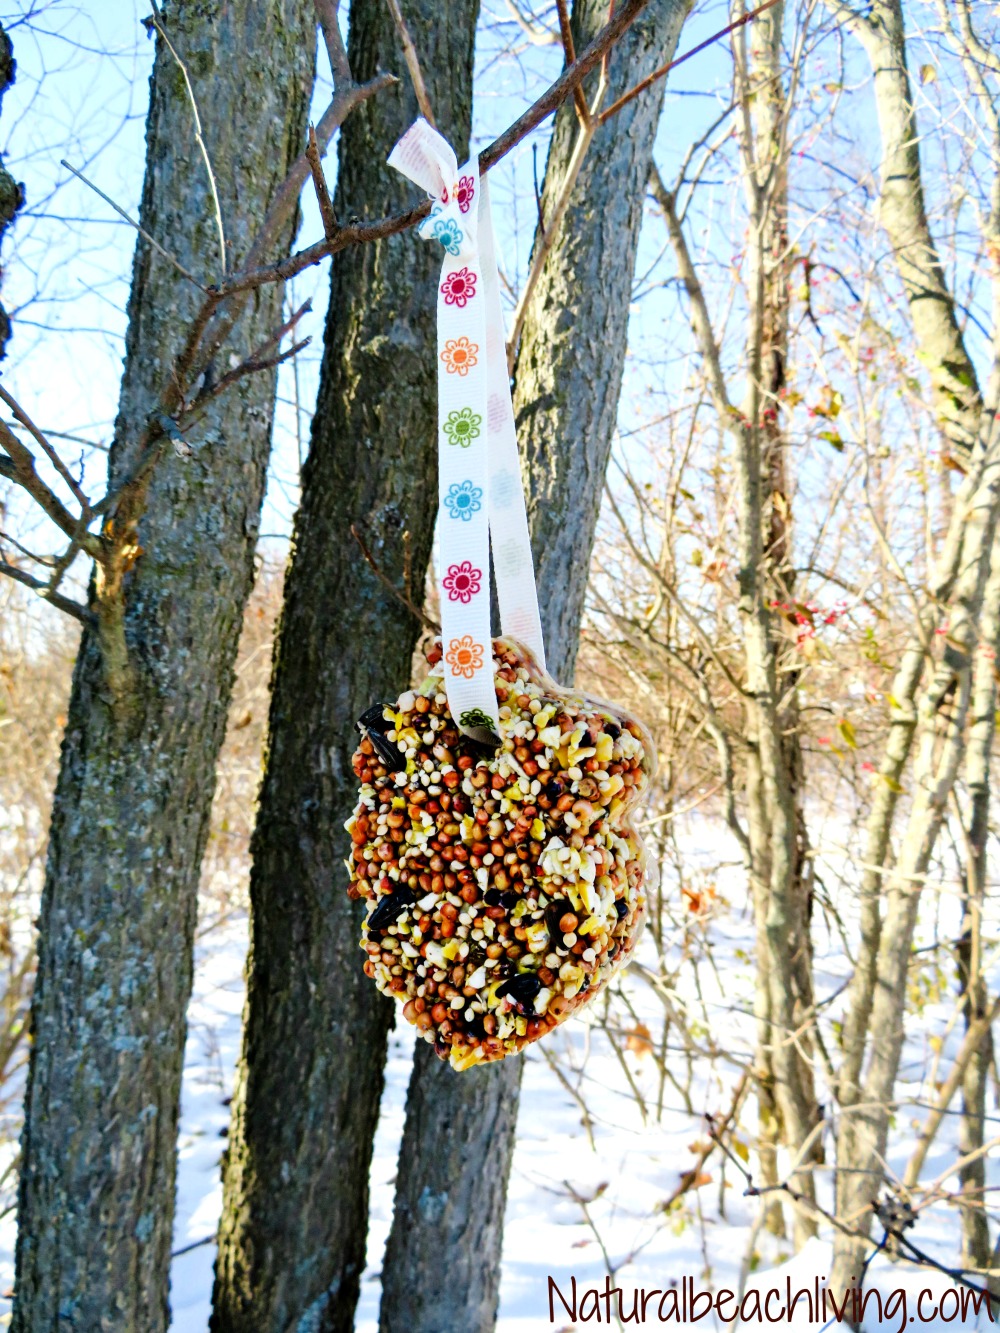 See How Easy it is to Make The Best Birdseed Ornaments, Homemade Birdseed treats make a great activity for kids, Make these DIY Bird feeders to feed your backyard birds and include your kids in this fun nature craft idea, Birdseed Ornaments Recipe